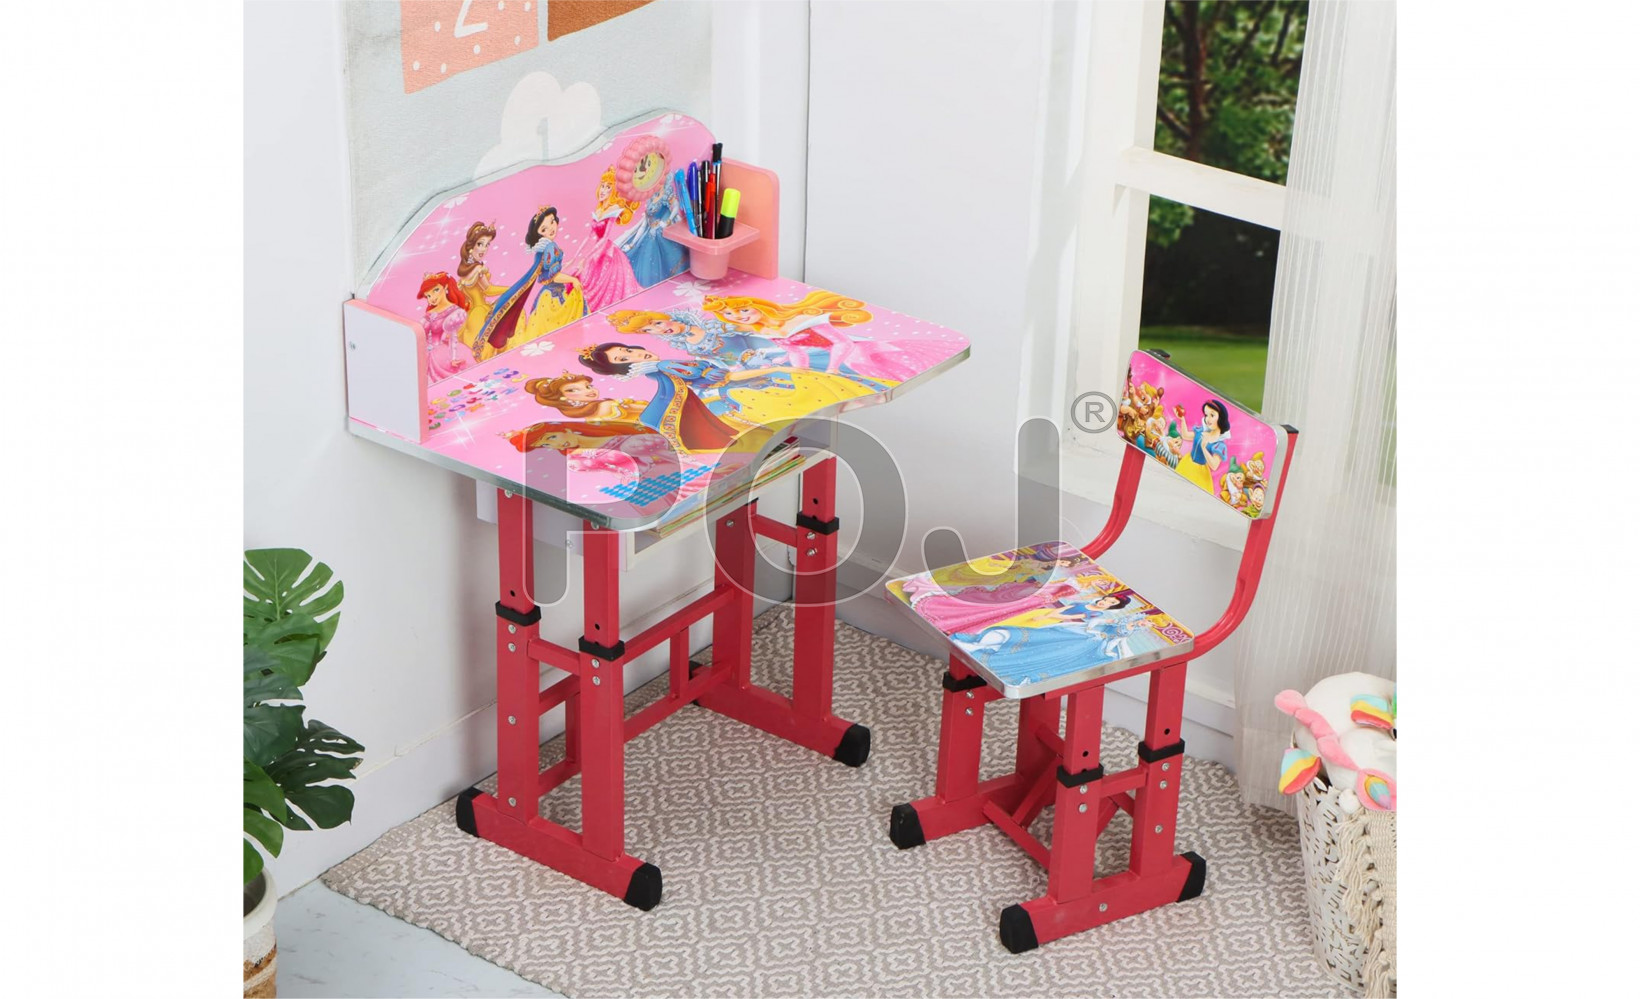 Baby Study Table